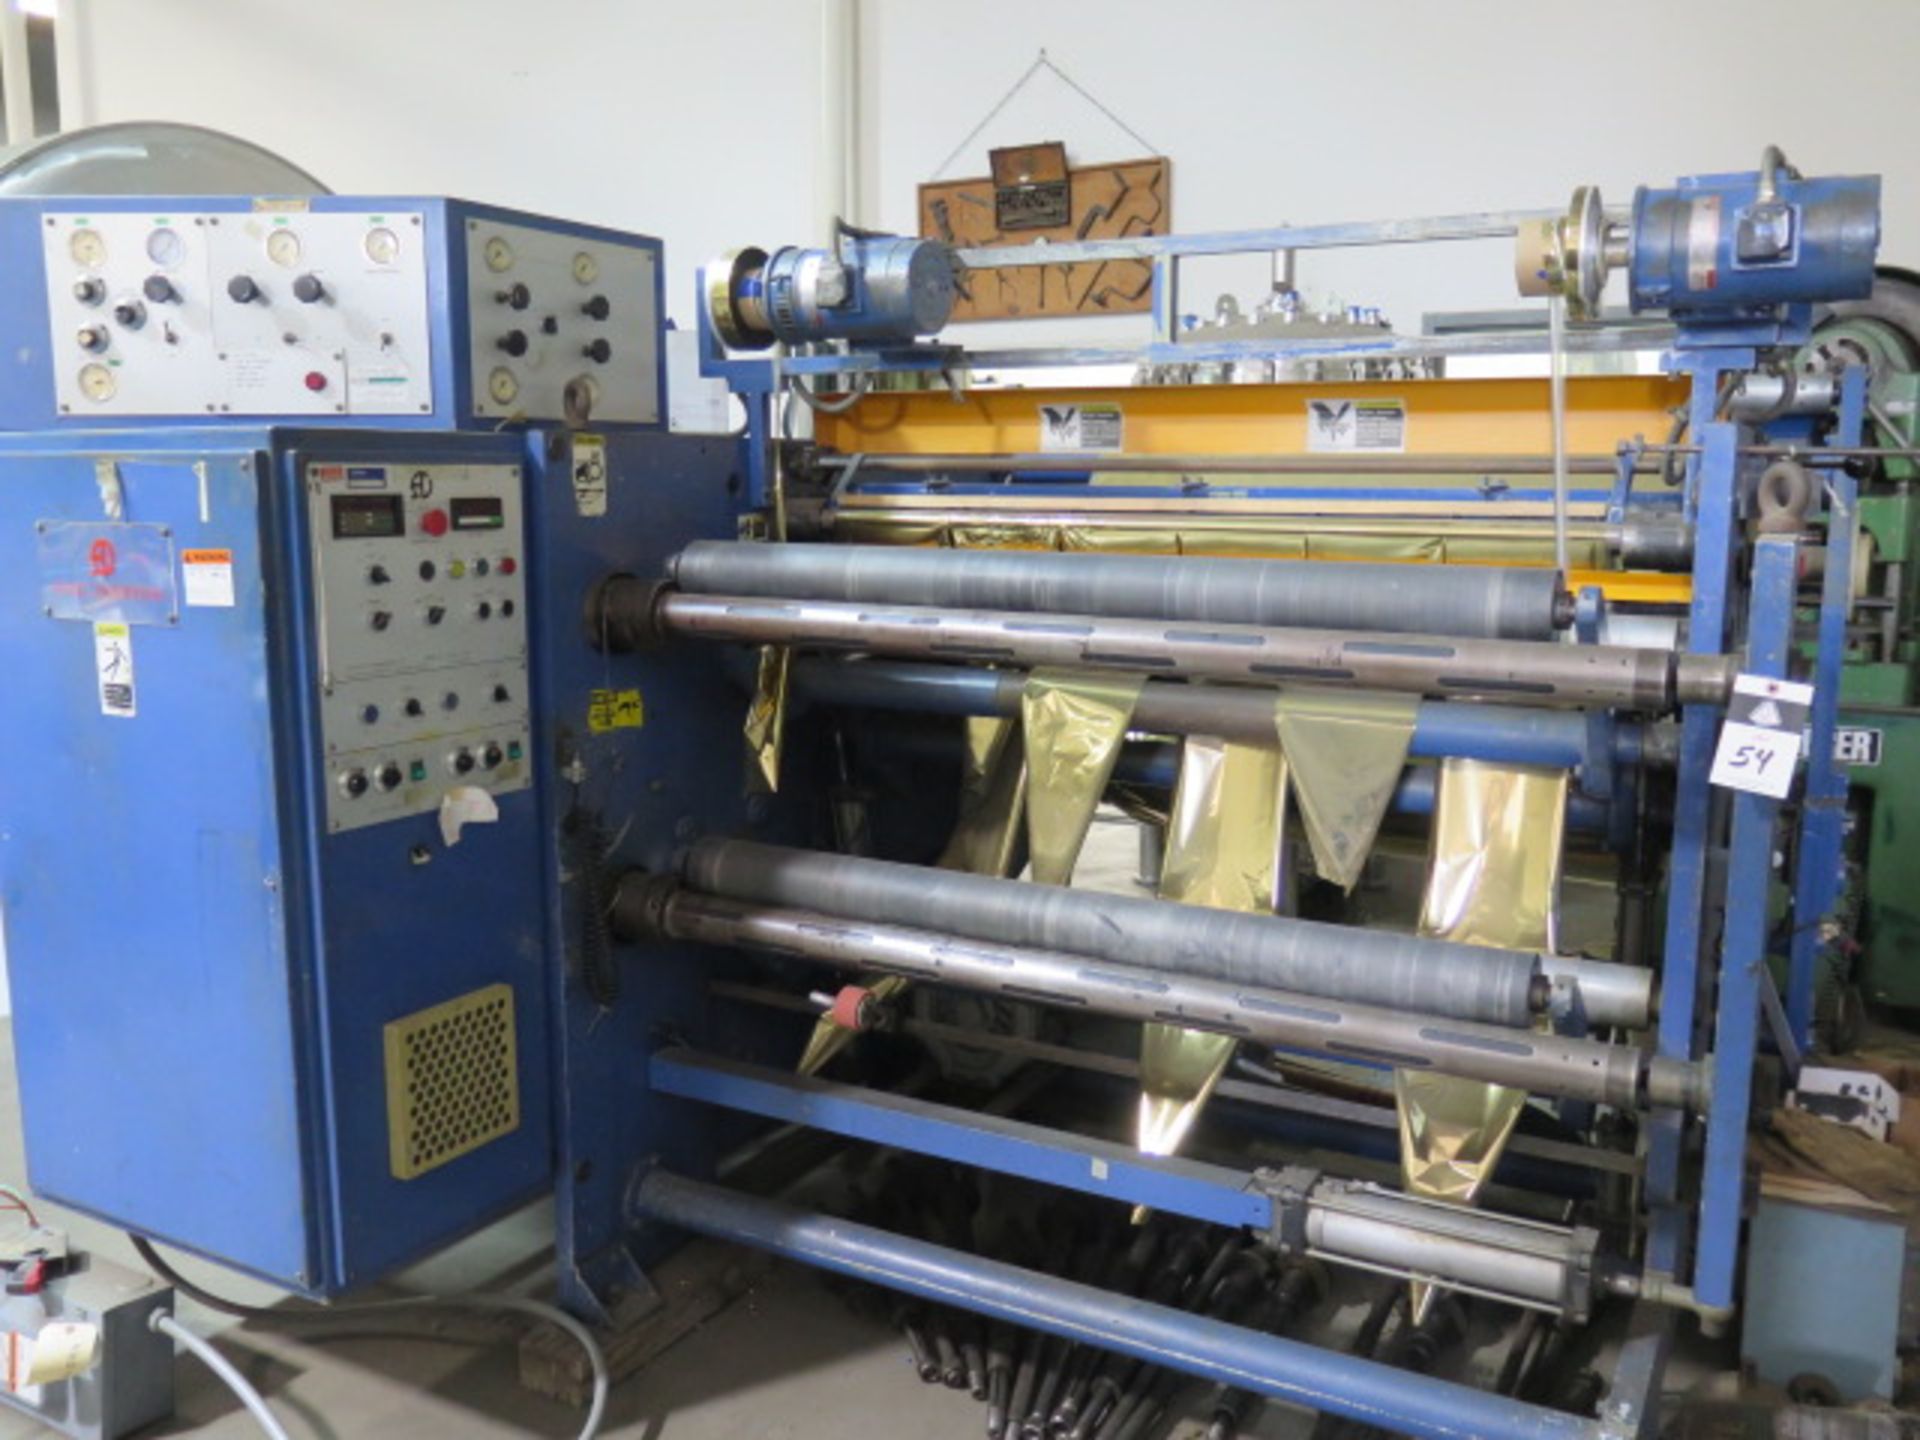 Alan Duffy Engineering 54" Web Slitter / Rewinder Label Foil Converting Machine SOLD AS IS